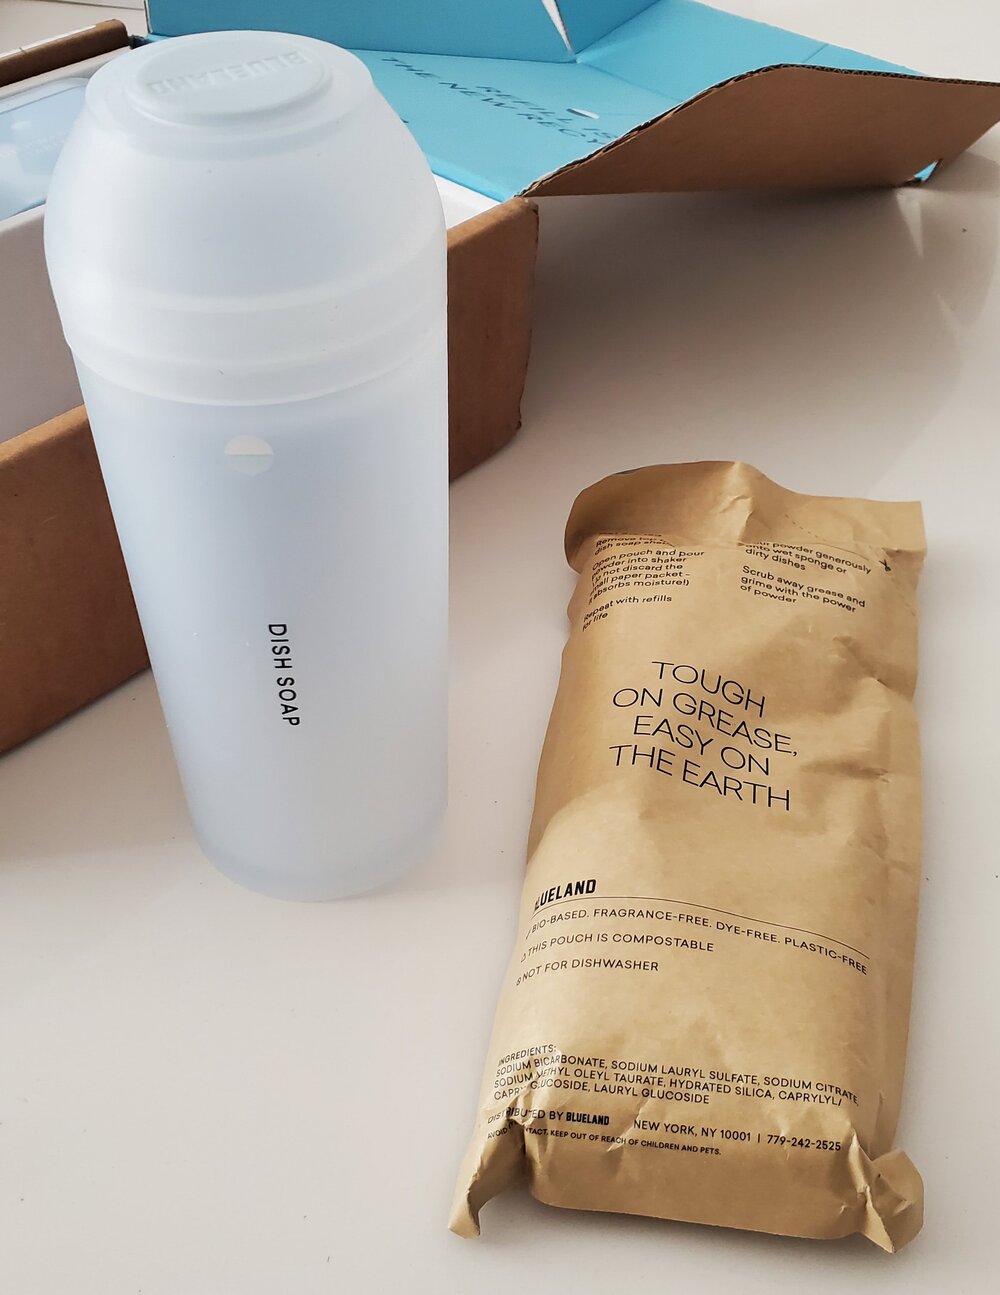 We bought Cleancult's dishwasher tablets and refillable container, here's  what we thought — The Reduce Report